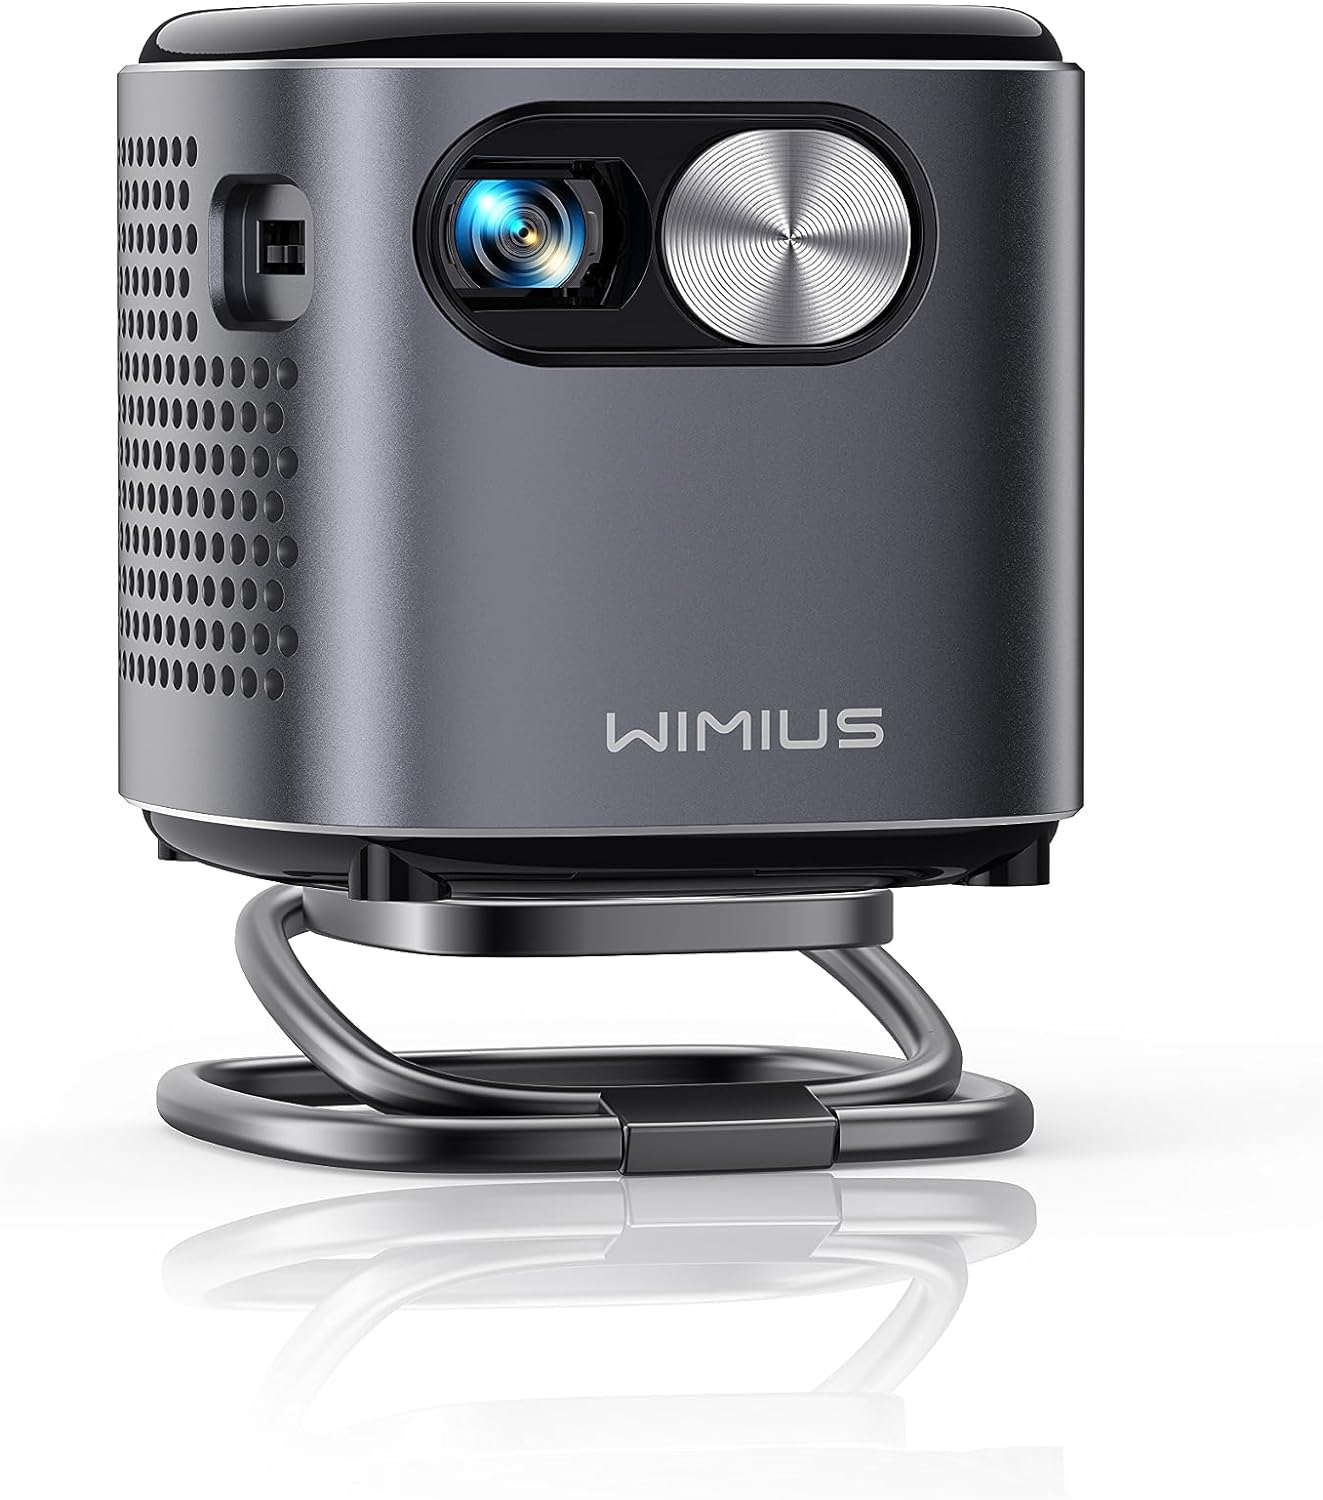 Mini Projector with Rechargeable Battery, Wimius Q2 Pocket Portable Projector with WiFi&Bluetooth, Android TV & 360°Speaker, 1080P Support, Wireless Smart Pico DLP Outdoor Projector for Phone/HDMI/USB